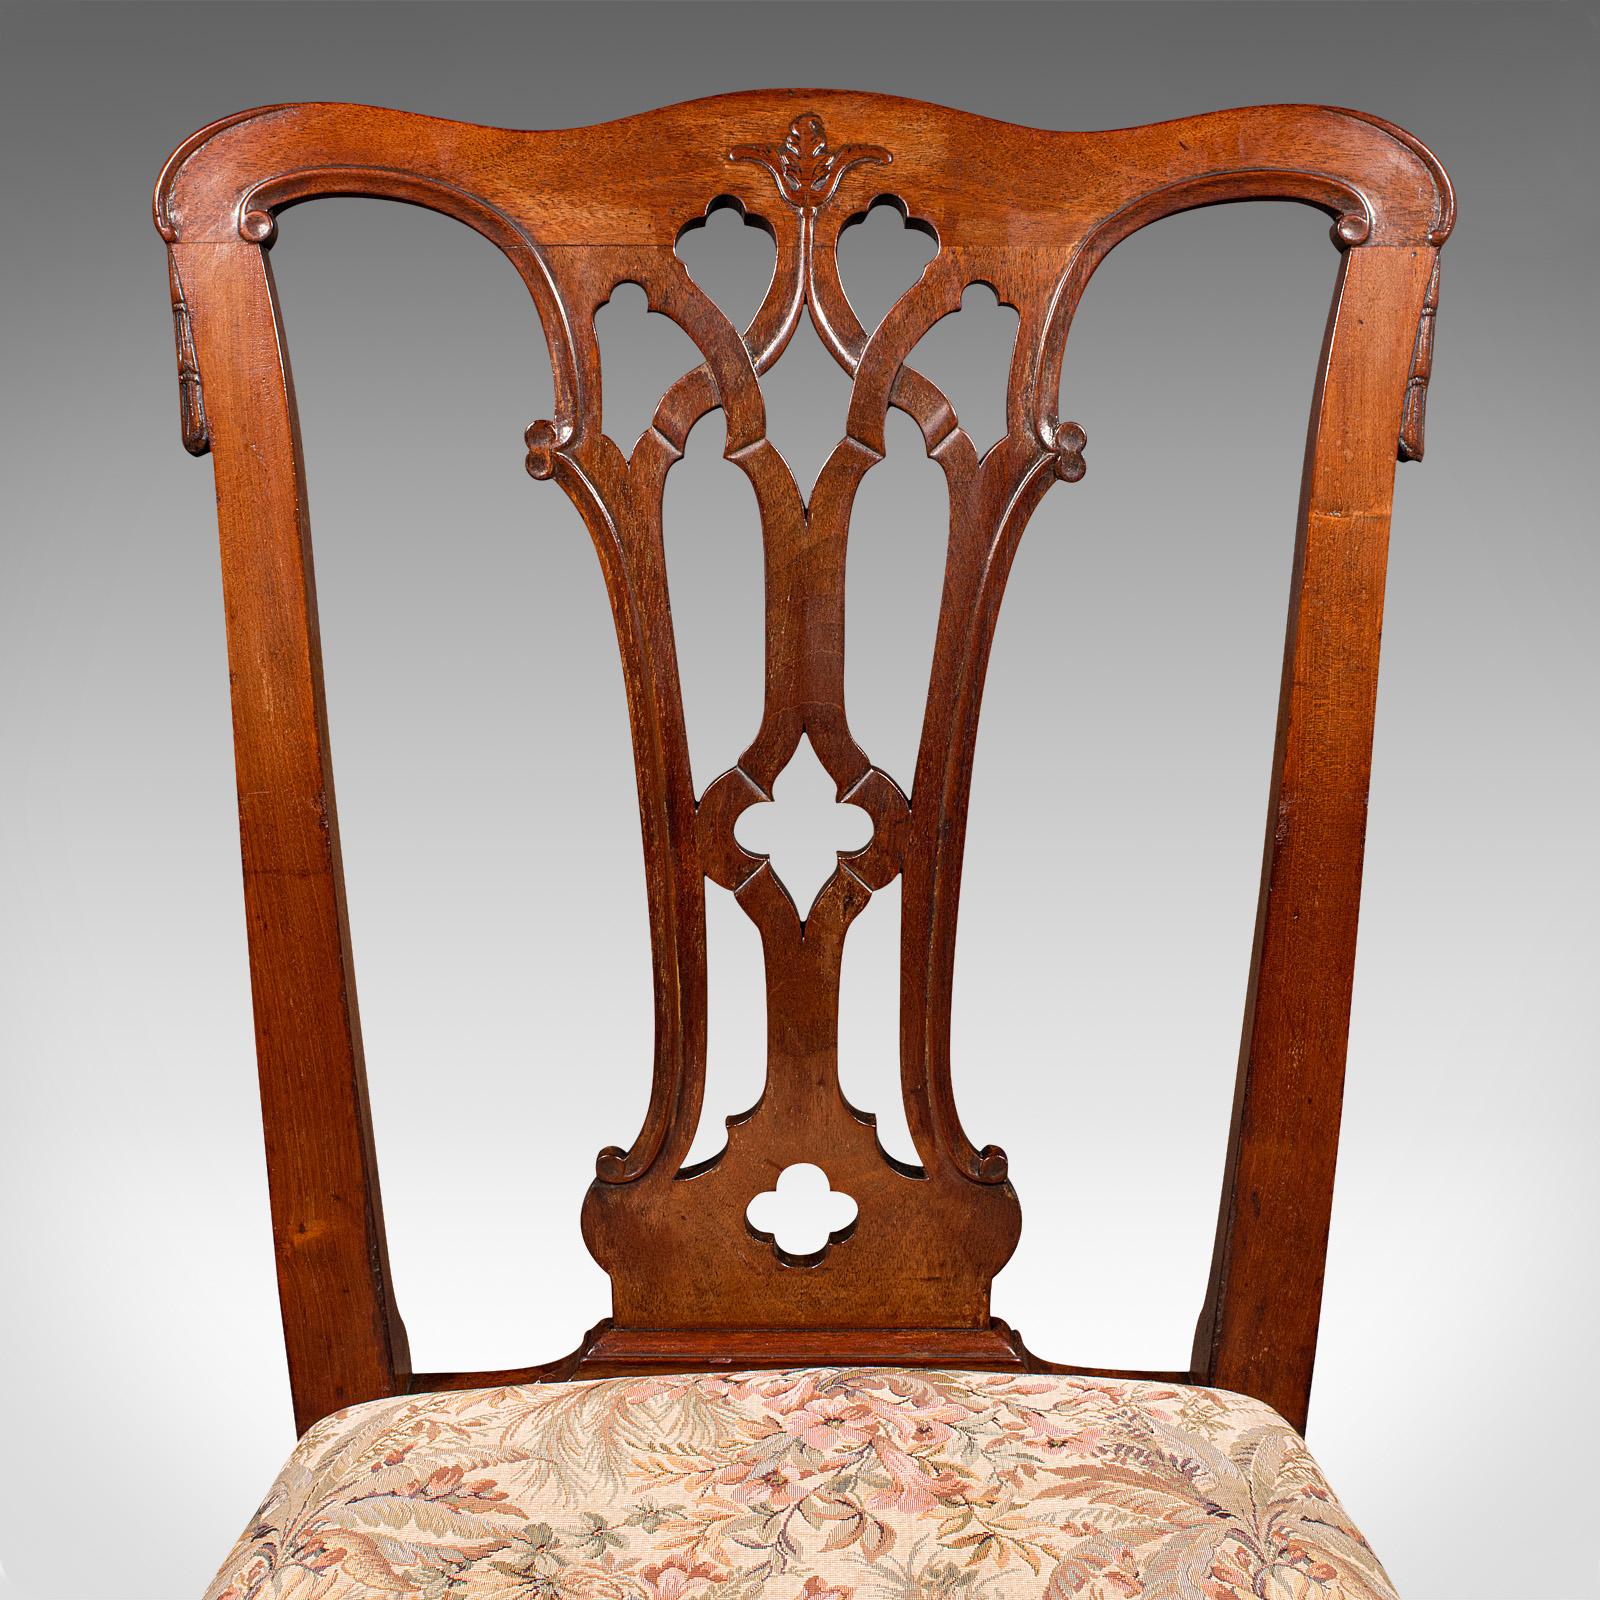 6 Antique Dining Room Chairs, English, Walnut, After Chippendale, Georgian, 1800 1